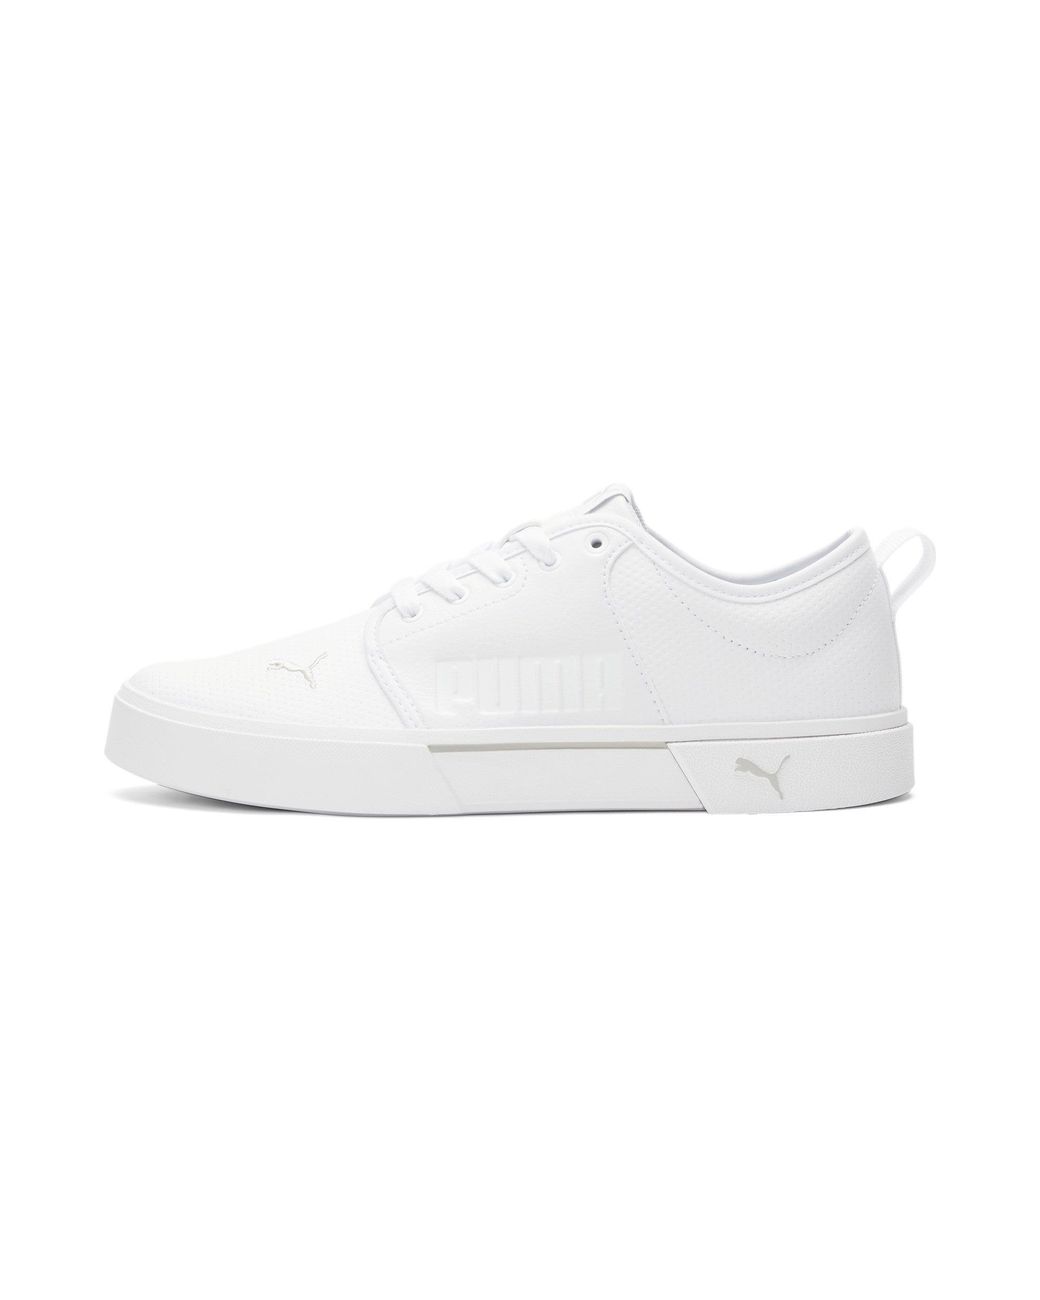 PUMA El Rey Ii Perforated Slip-on Shoes in White/Gray Violet (White) for  Men | Lyst